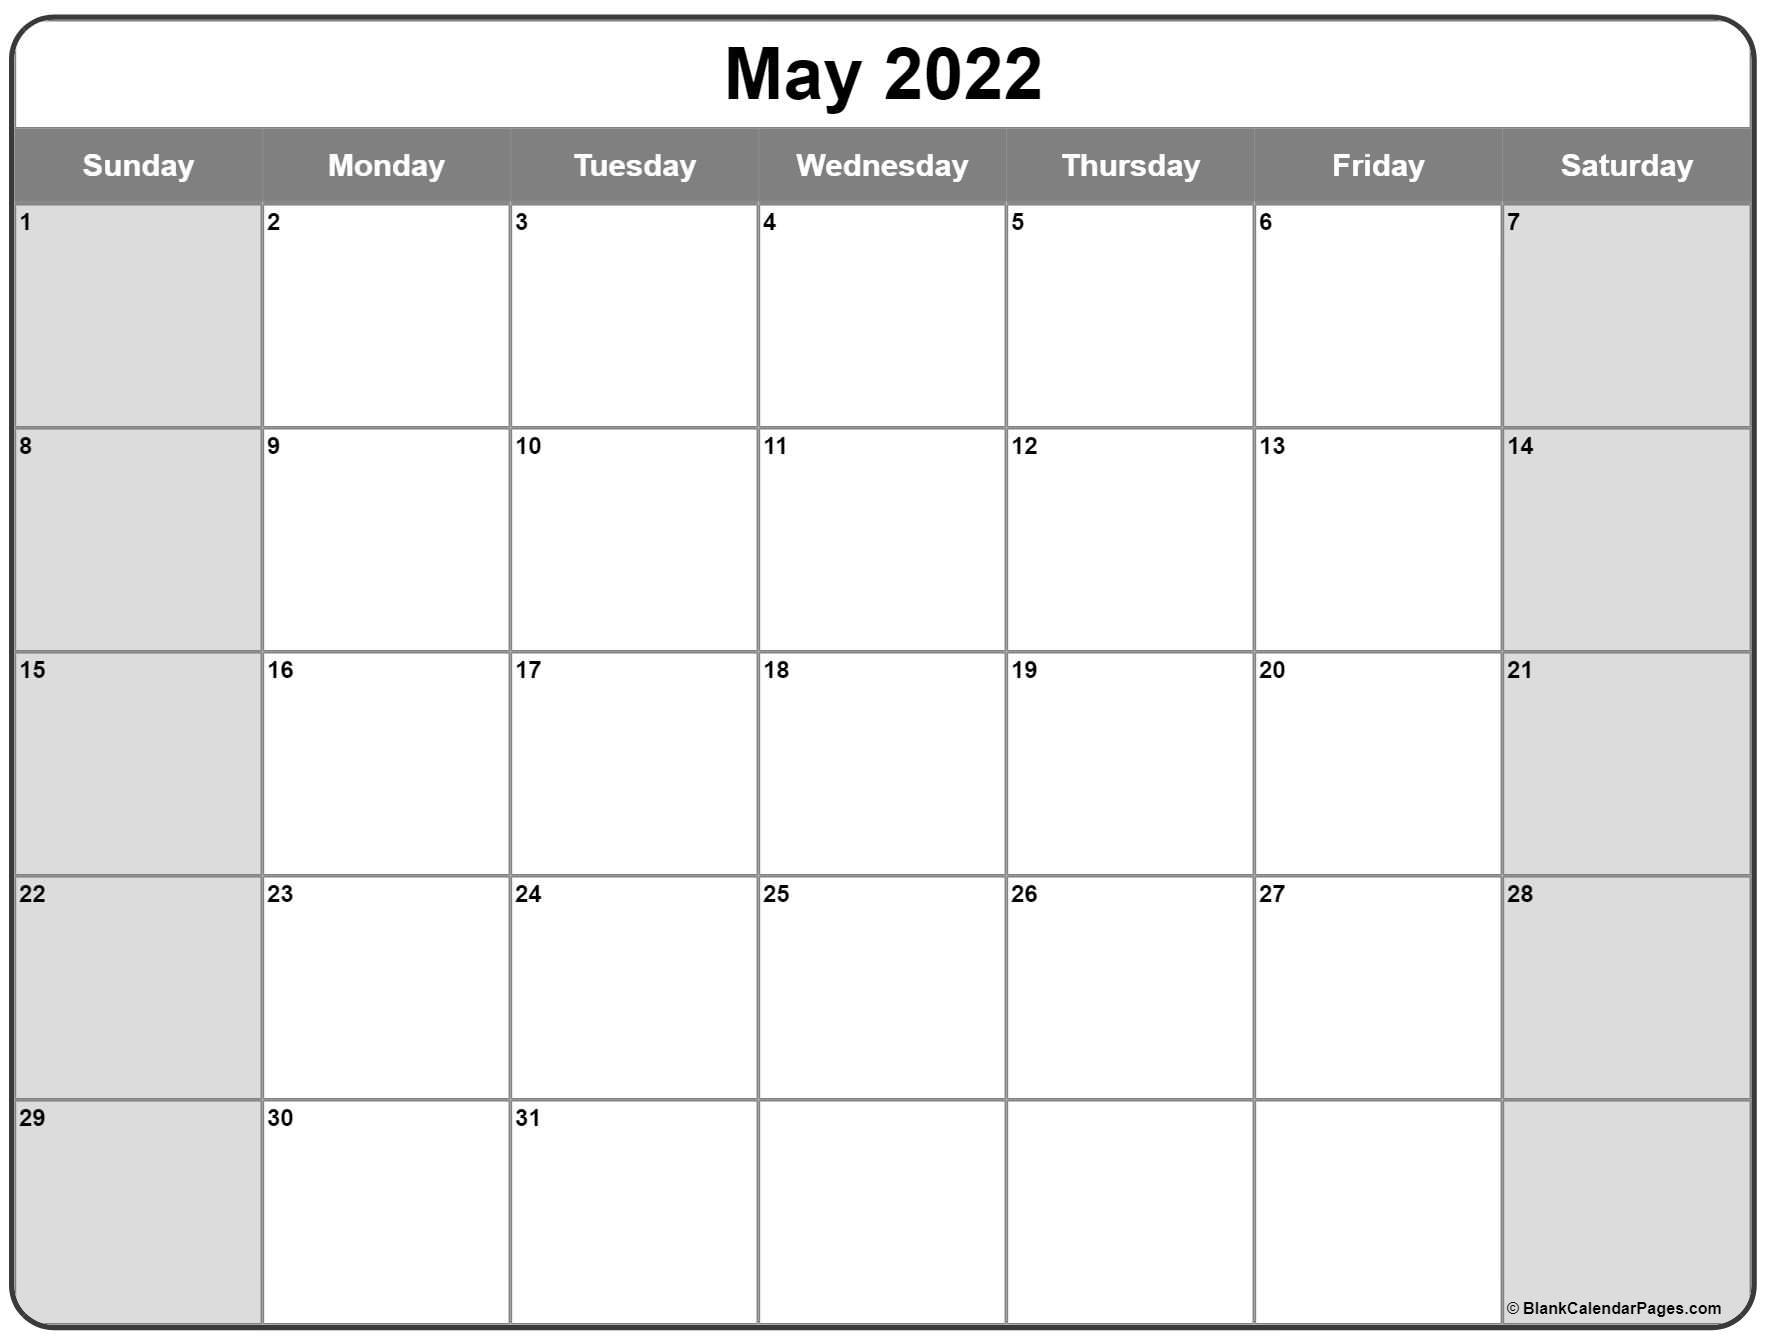 May 2022 Calendar | Free Printable Calendar Templates within Large Free Printable 2022 Months